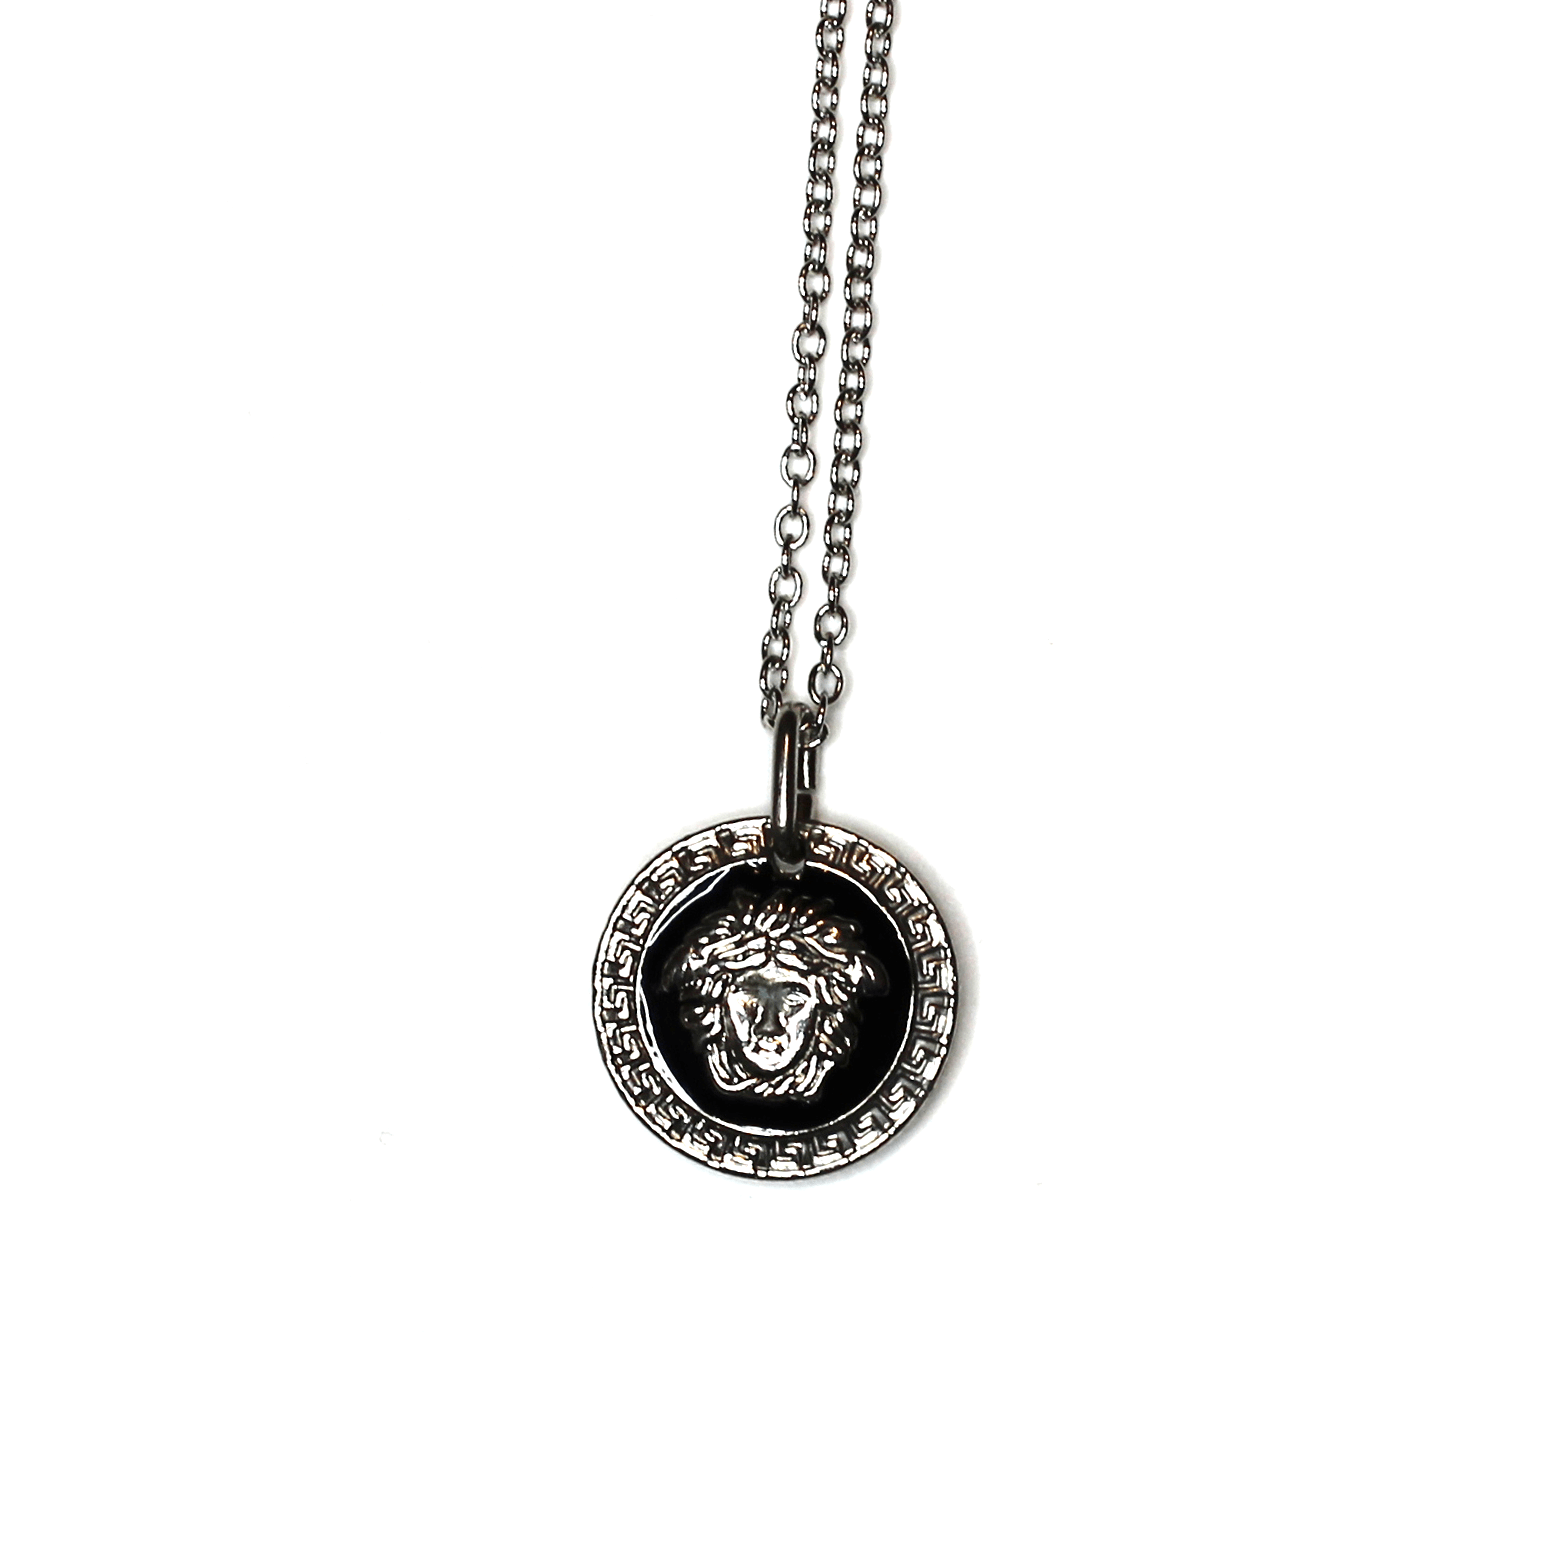 Silver Gianni Versace Black/ White Double Sided Medusa Head Coin Pendent Chain RSTKD Vintage